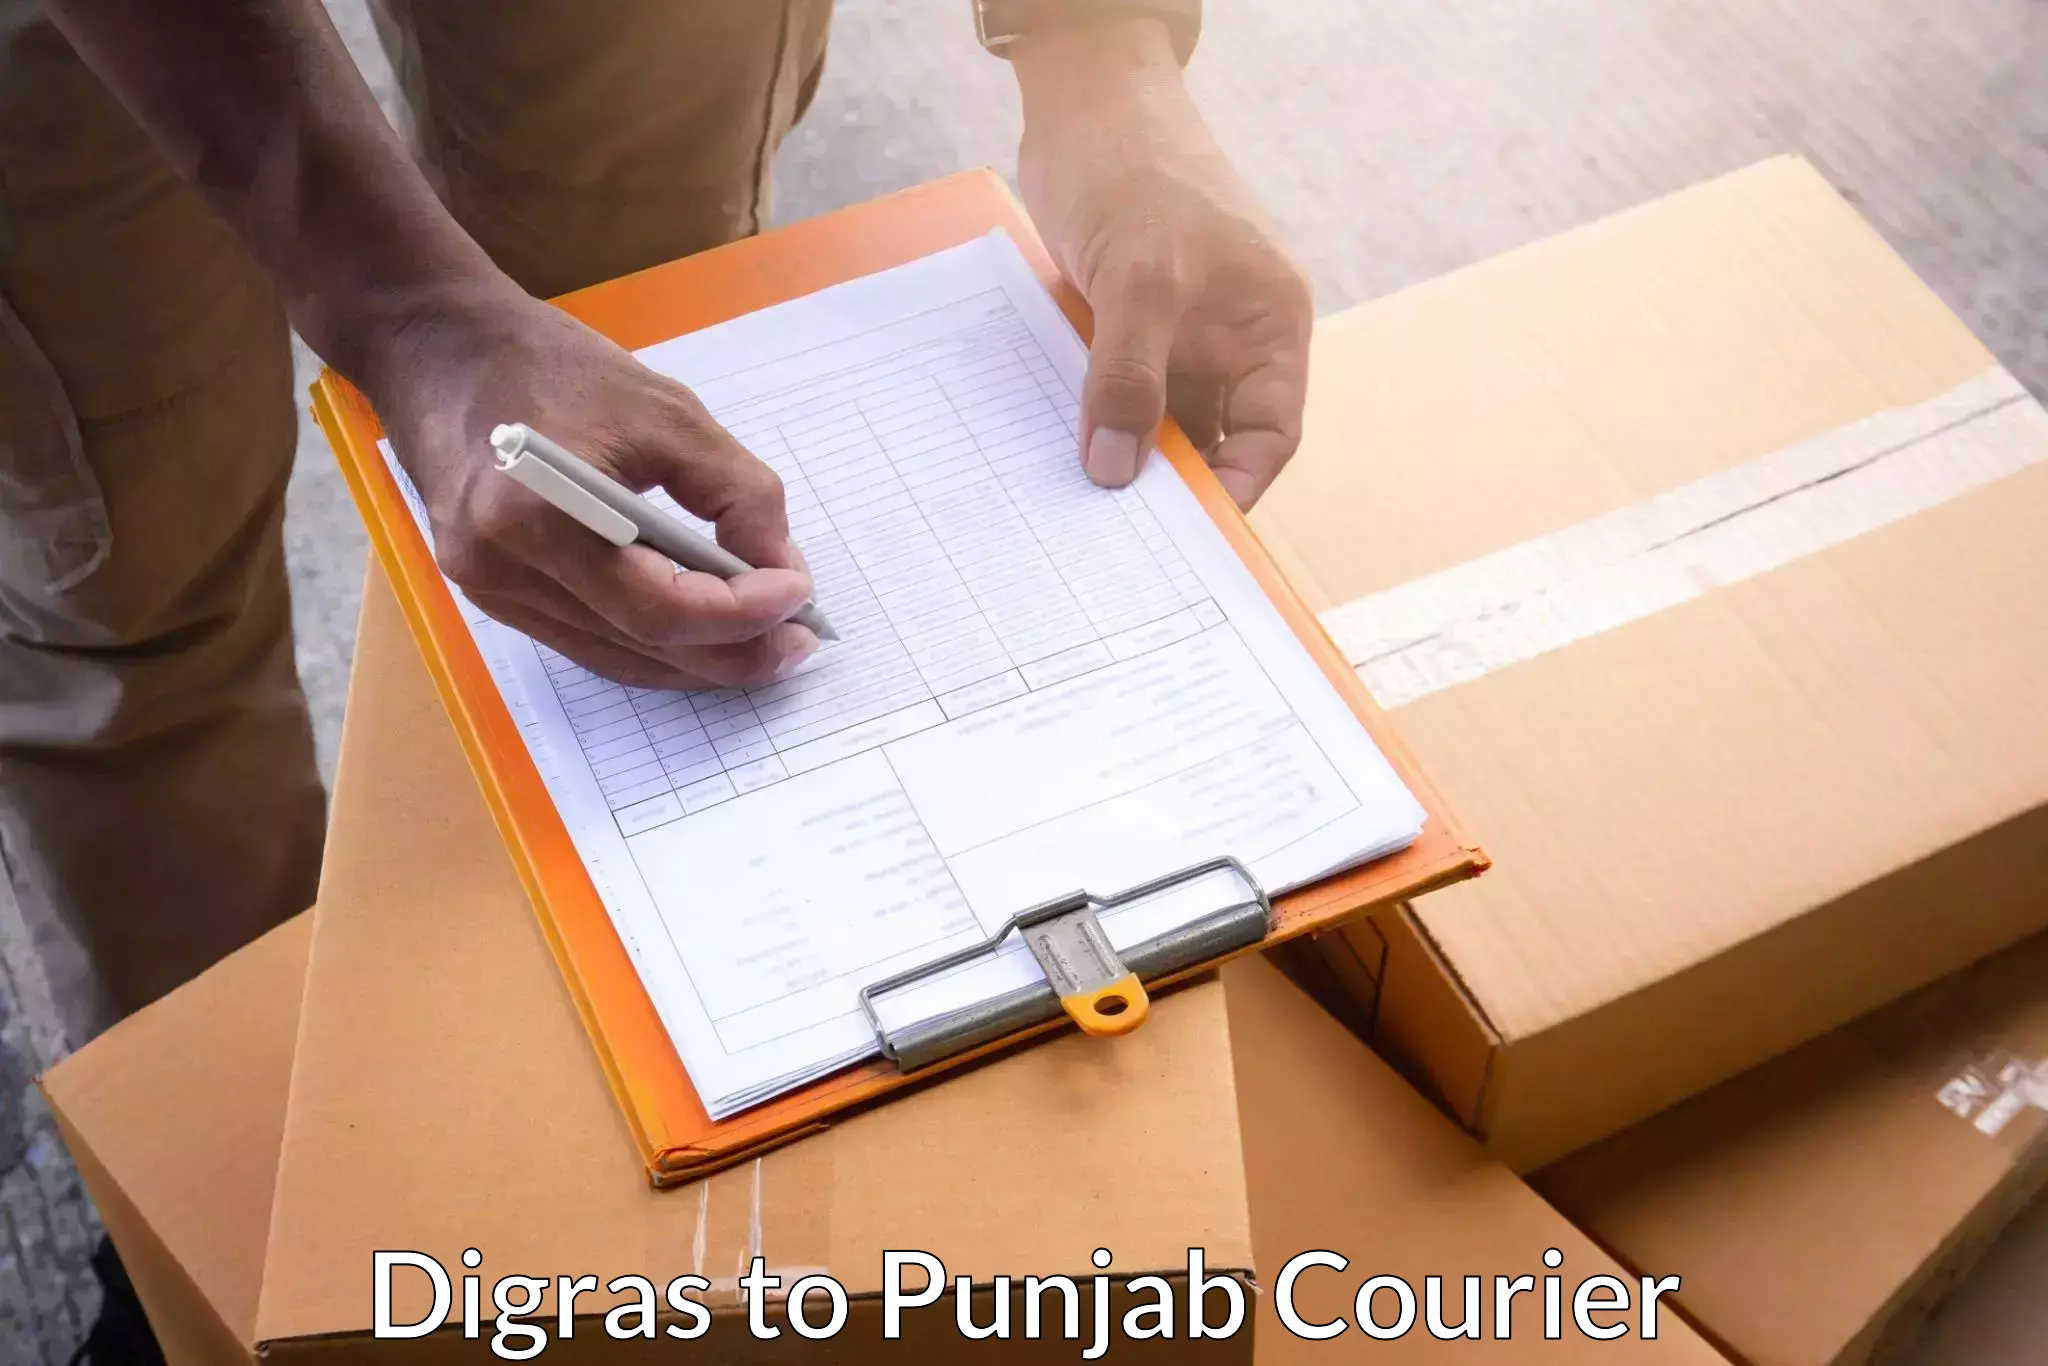 Residential courier service Digras to Bathinda